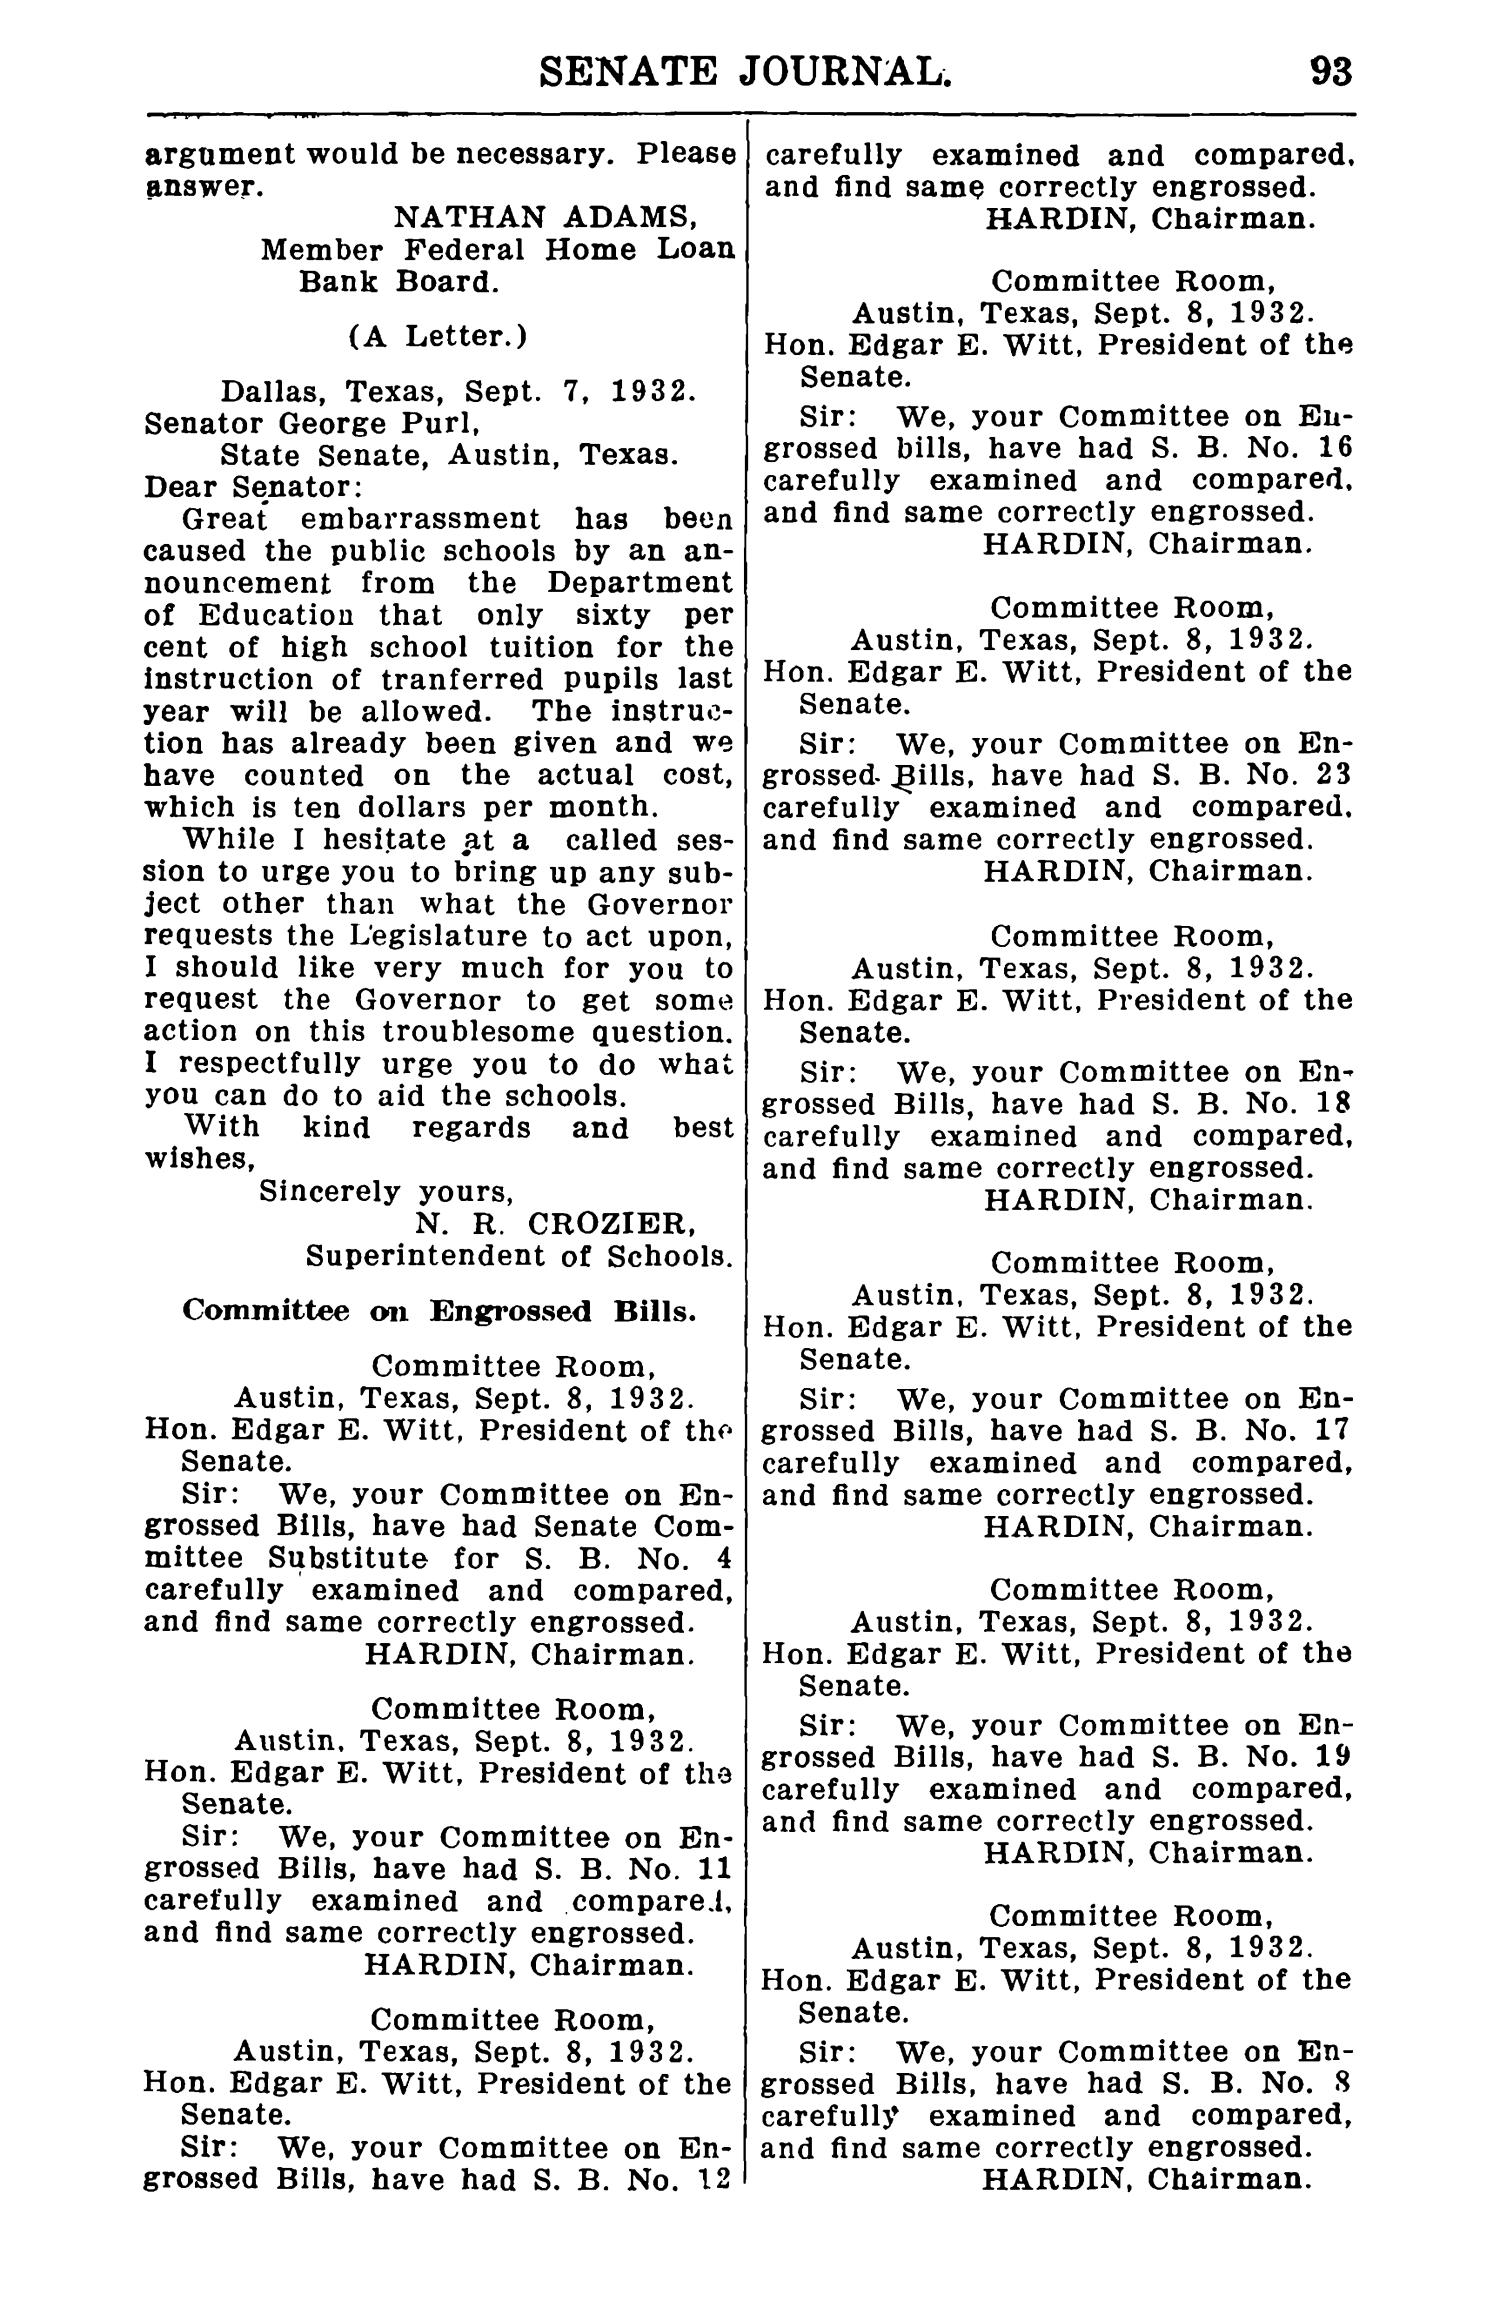 Journal of the Senate of Texas being the Third Called Session of the Forty-Second Legislature
                                                
                                                    93
                                                